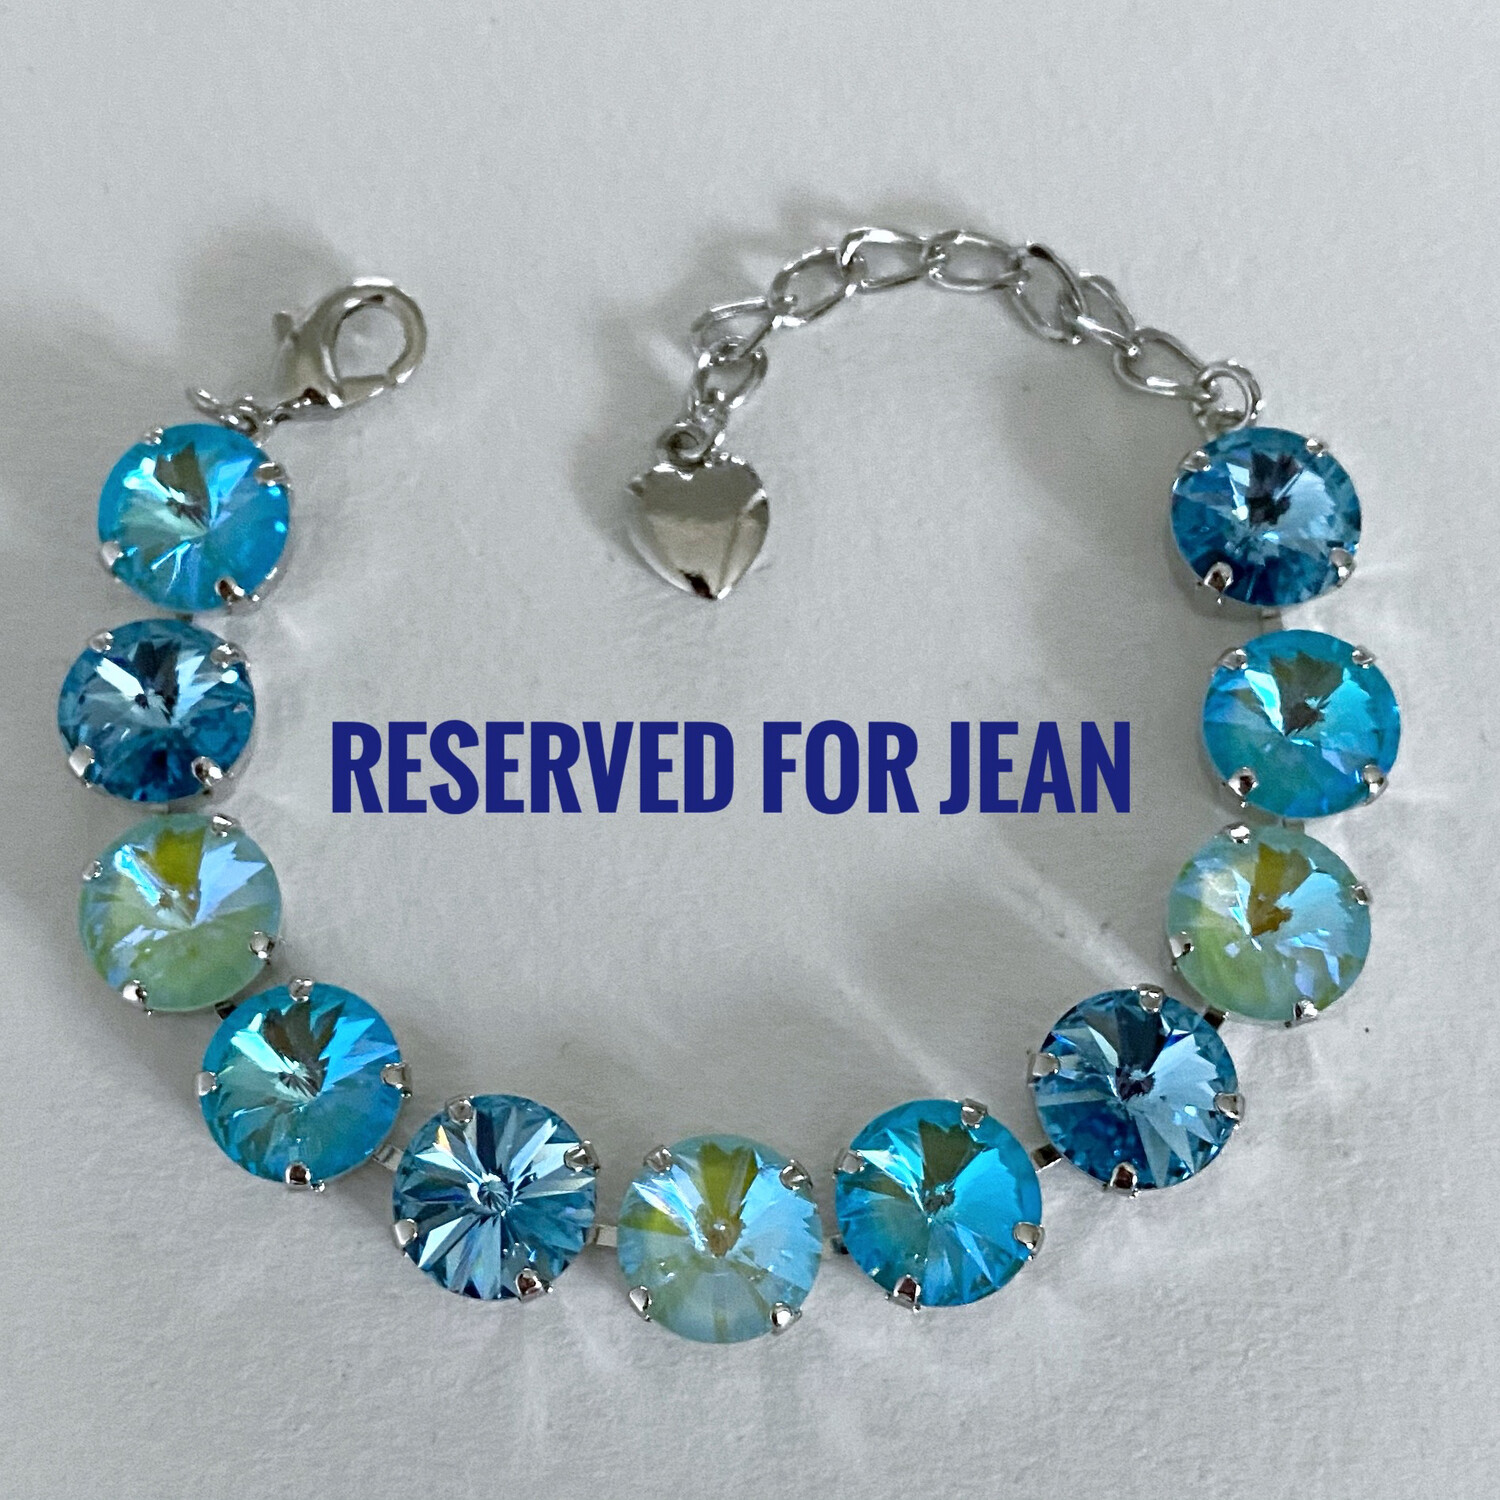 Reserved for Jean